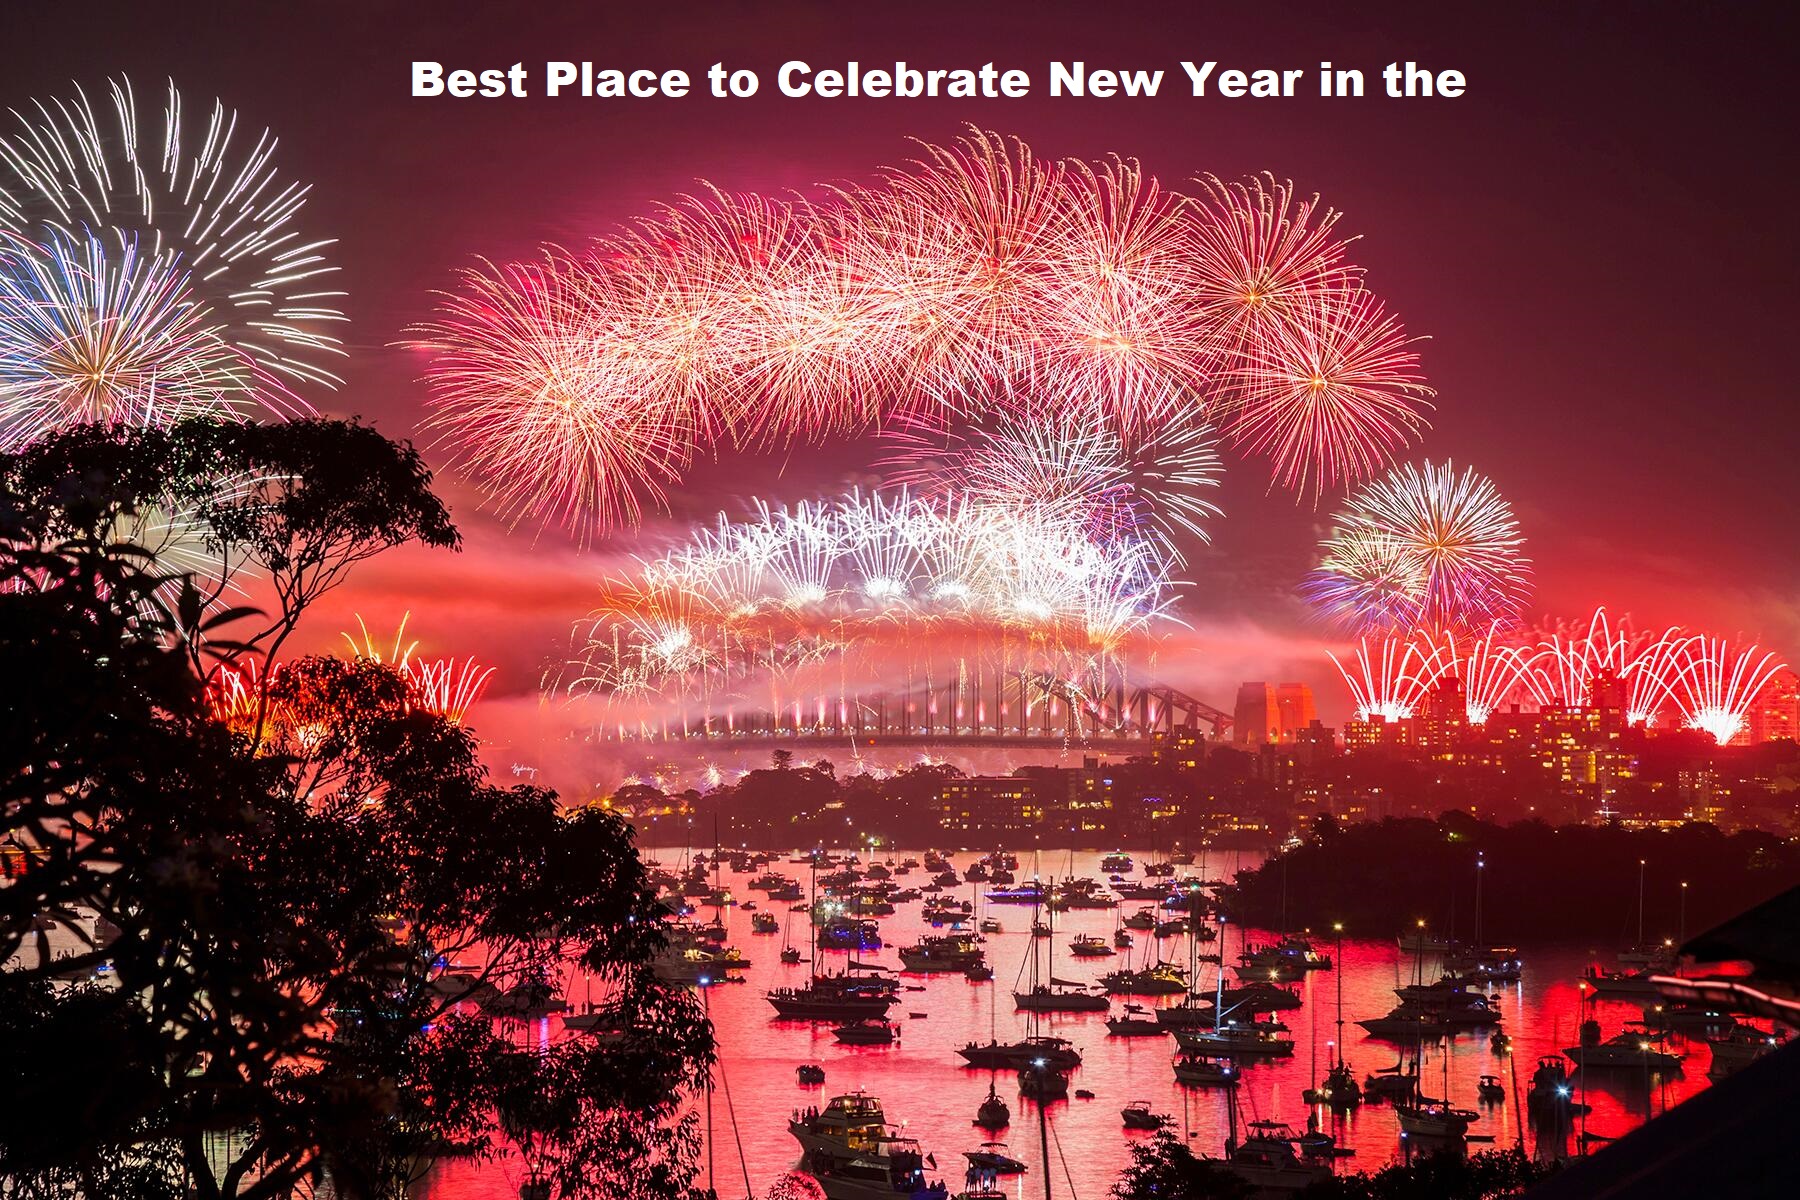 Best Place to Celebrate New Year in the World